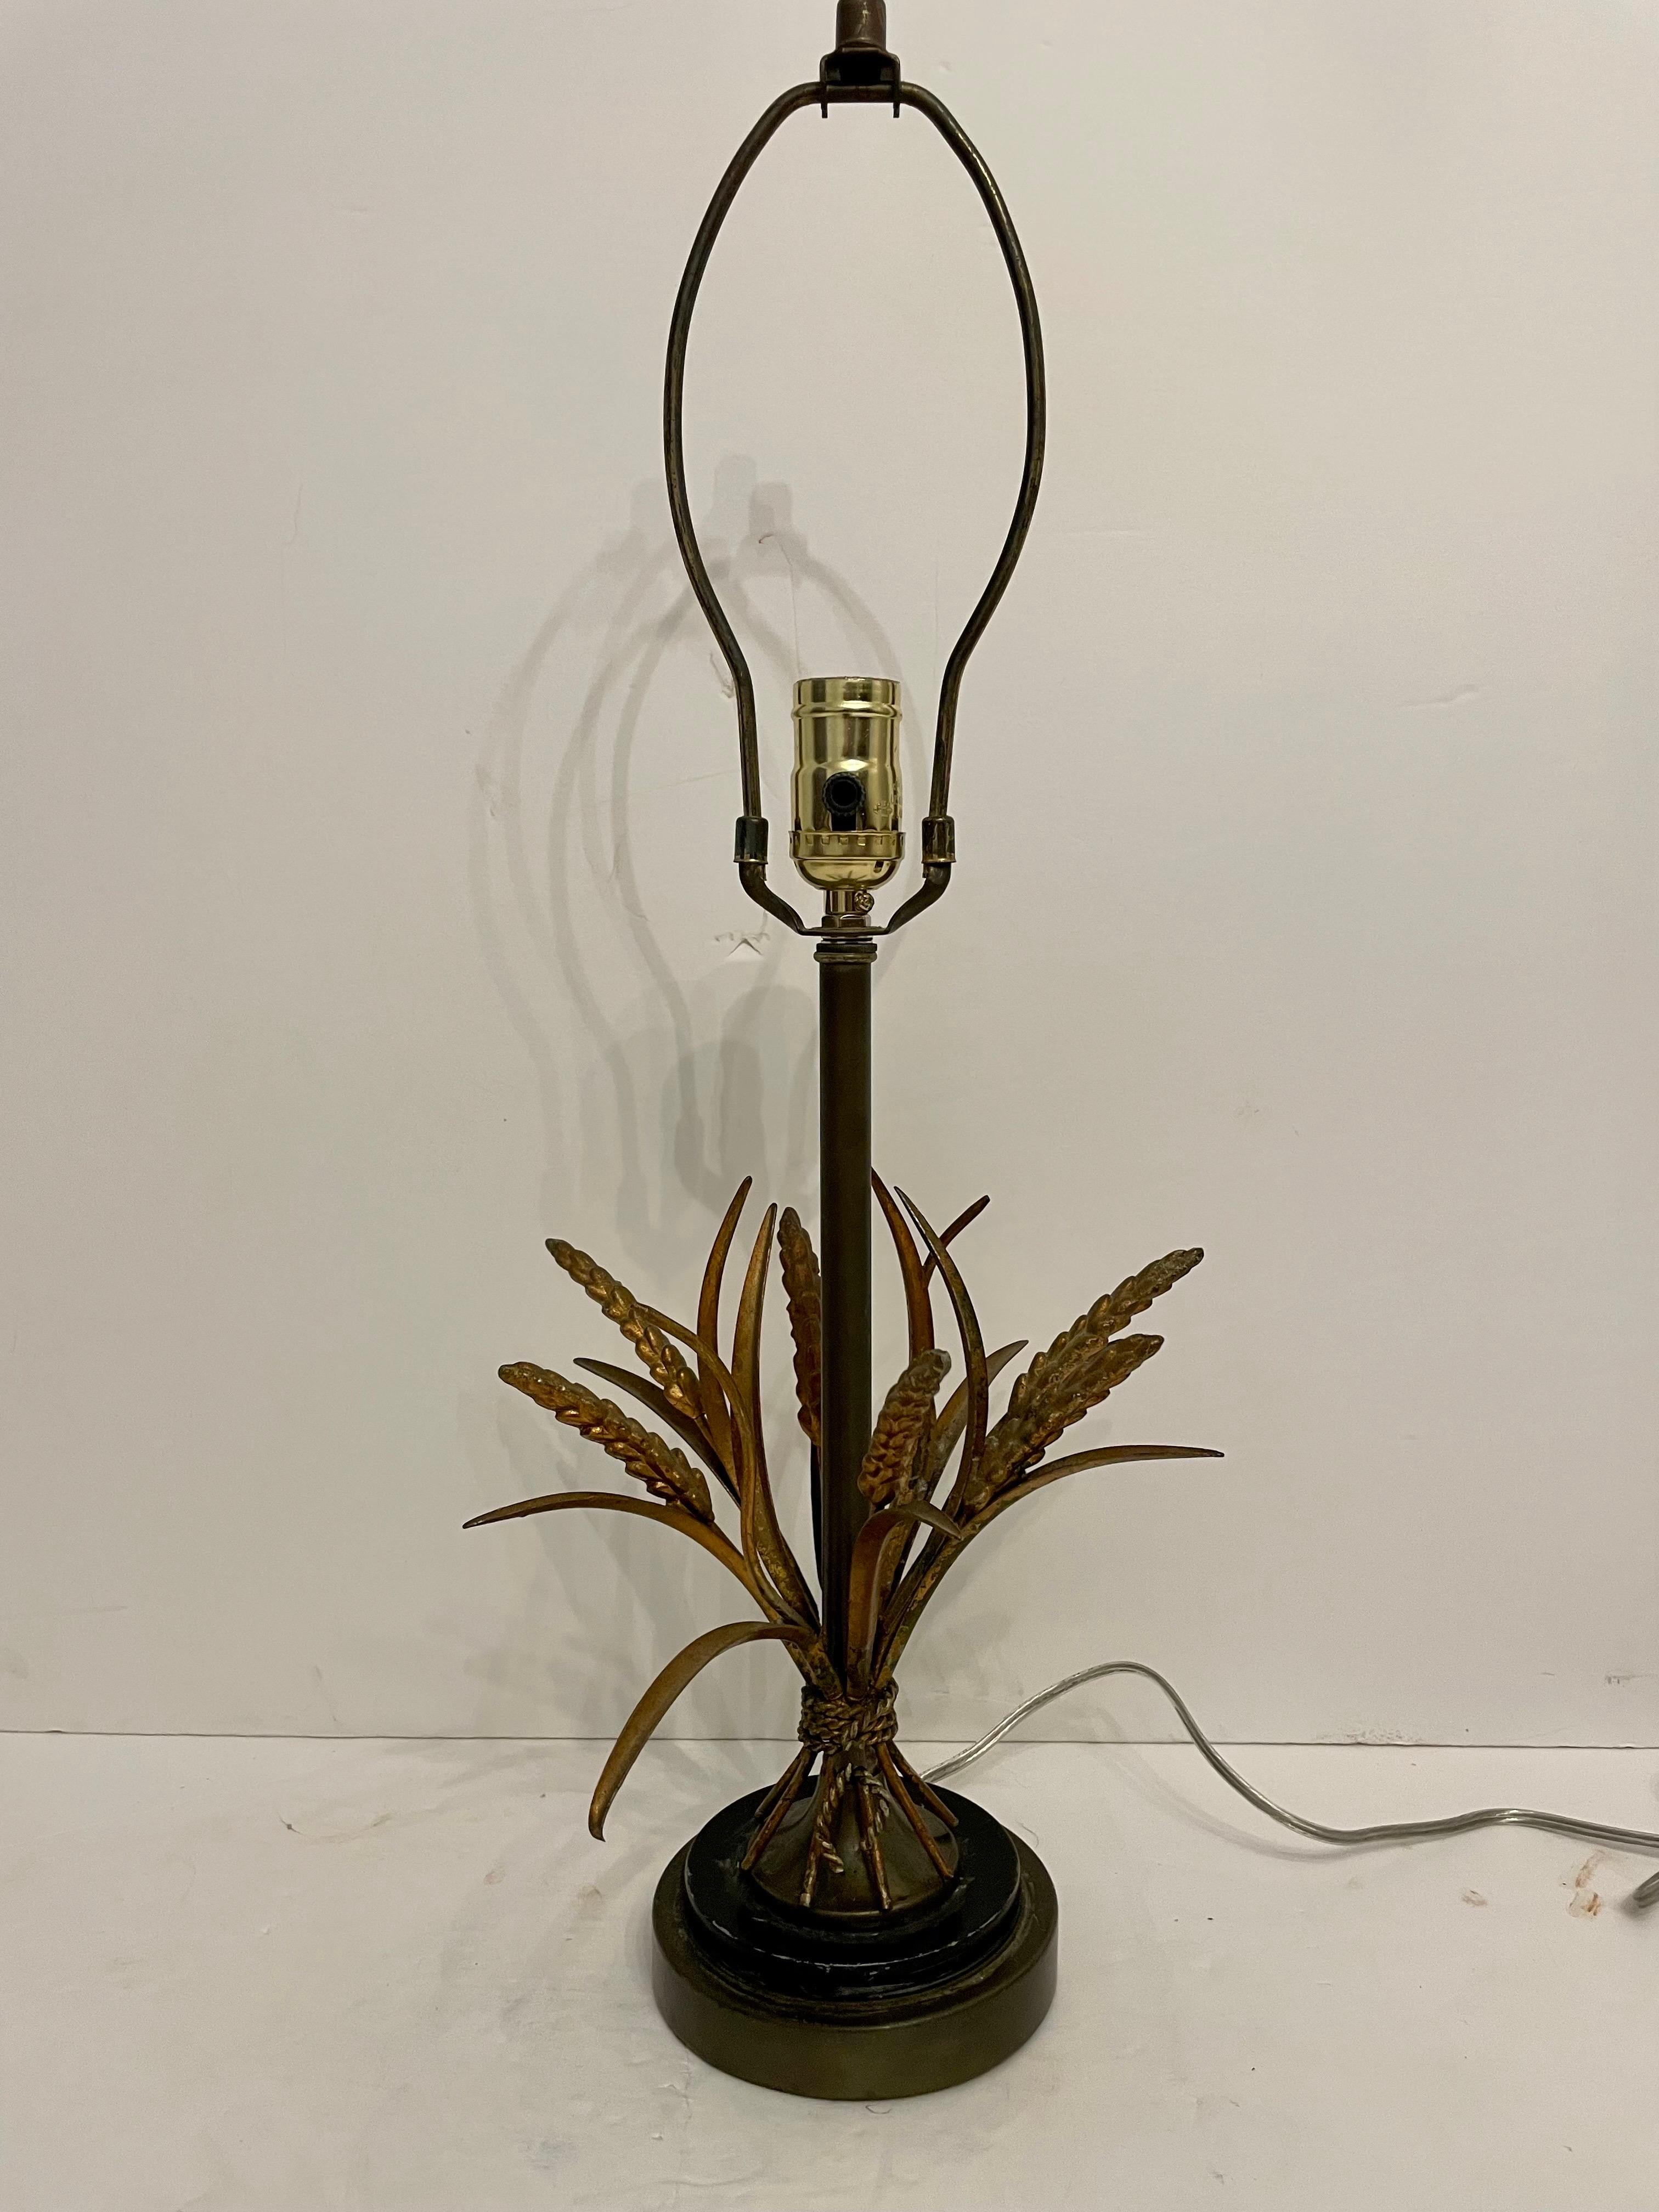 Italian gilt sheaf of wheat lamp rewired with old gold leaf finish. Nice scale and detail. Italy tag on twisted rope holding wheat sheaf. Some paint loss around base due to age and use. Good overall condition. Measures 23